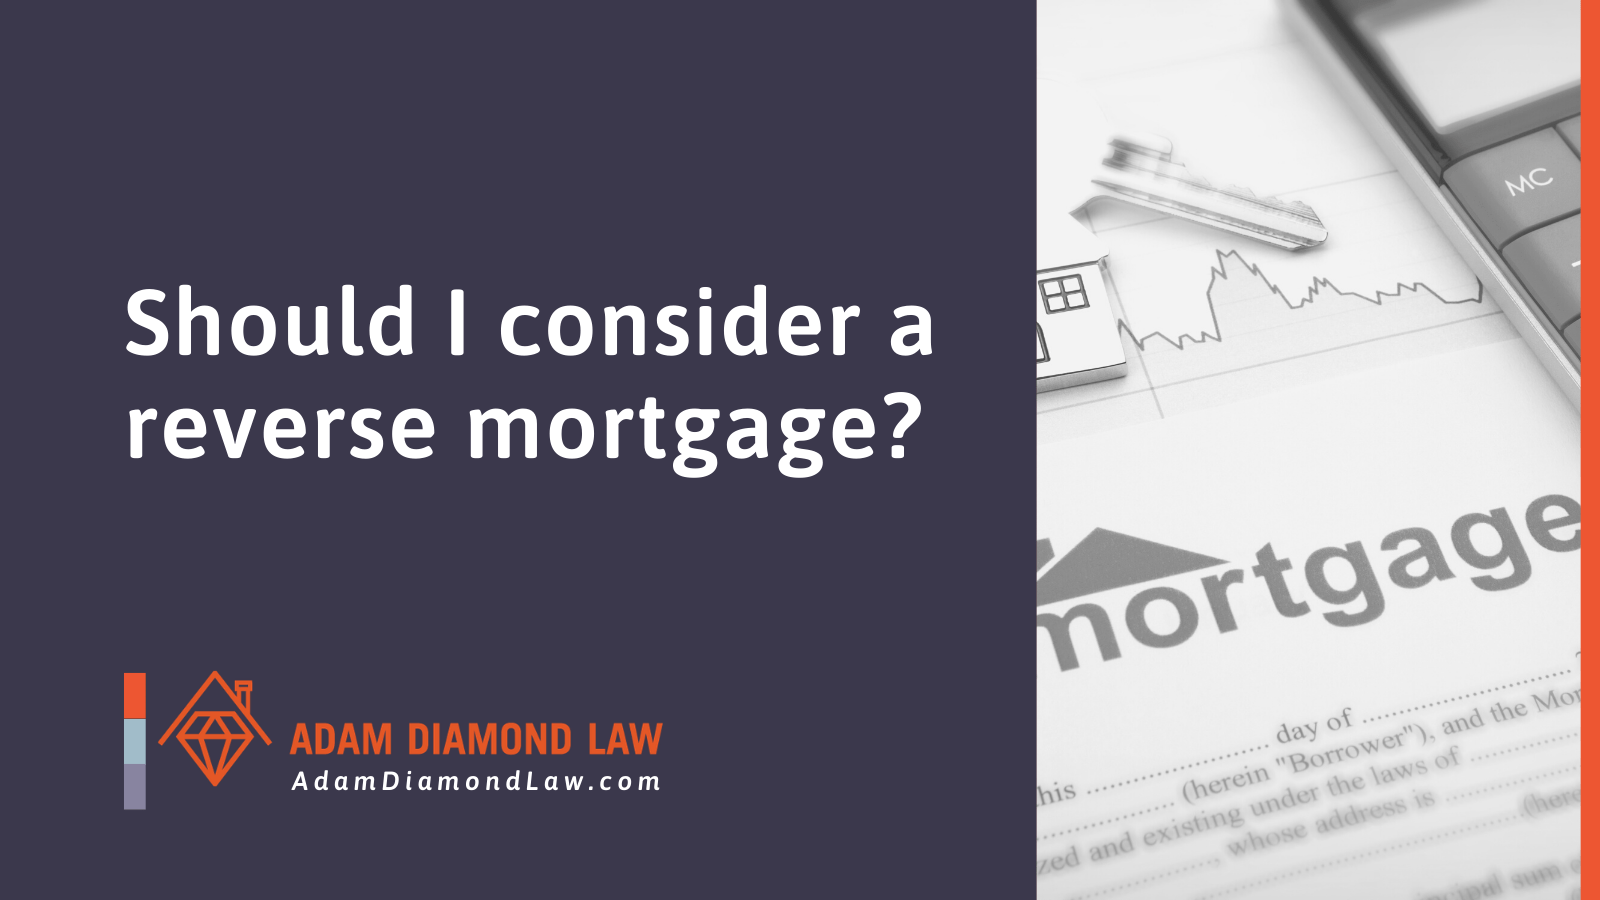 Should I consider a reverse mortgage - Adam Diamond Law | McHenry, IL Residential Real Estate Lawyer